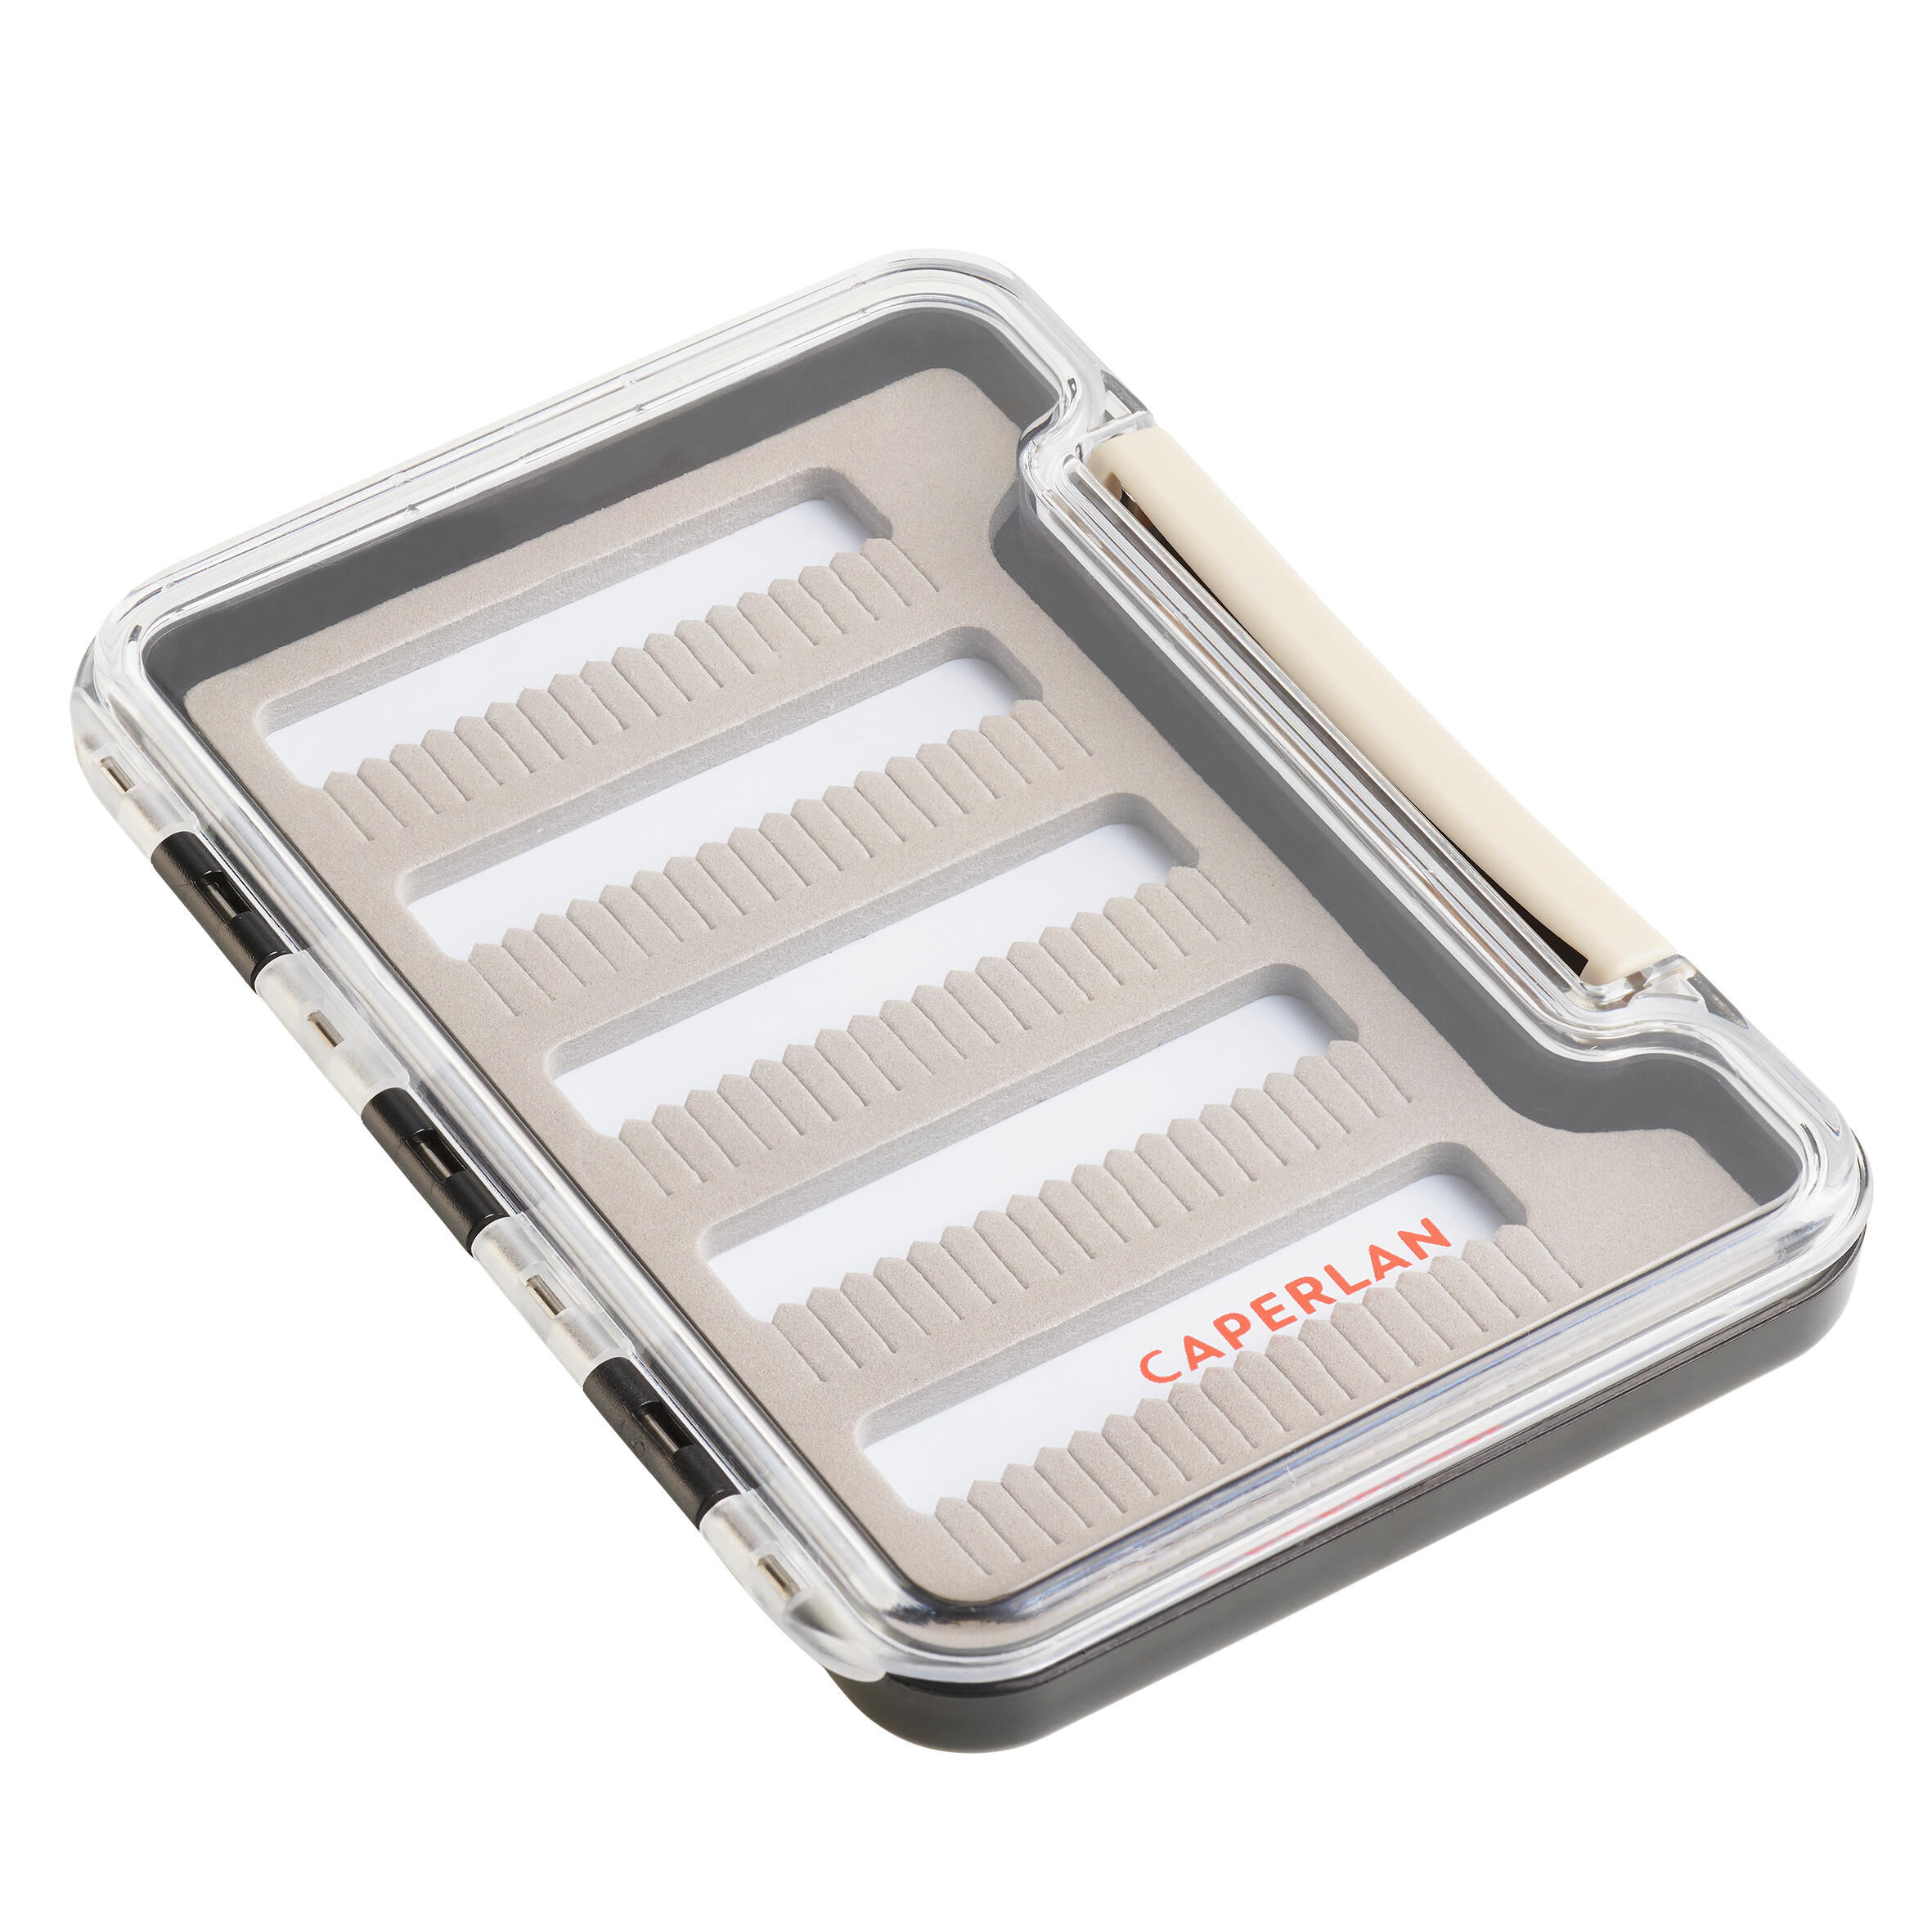 CAPERLAN FLY FISHING FLY BOX S